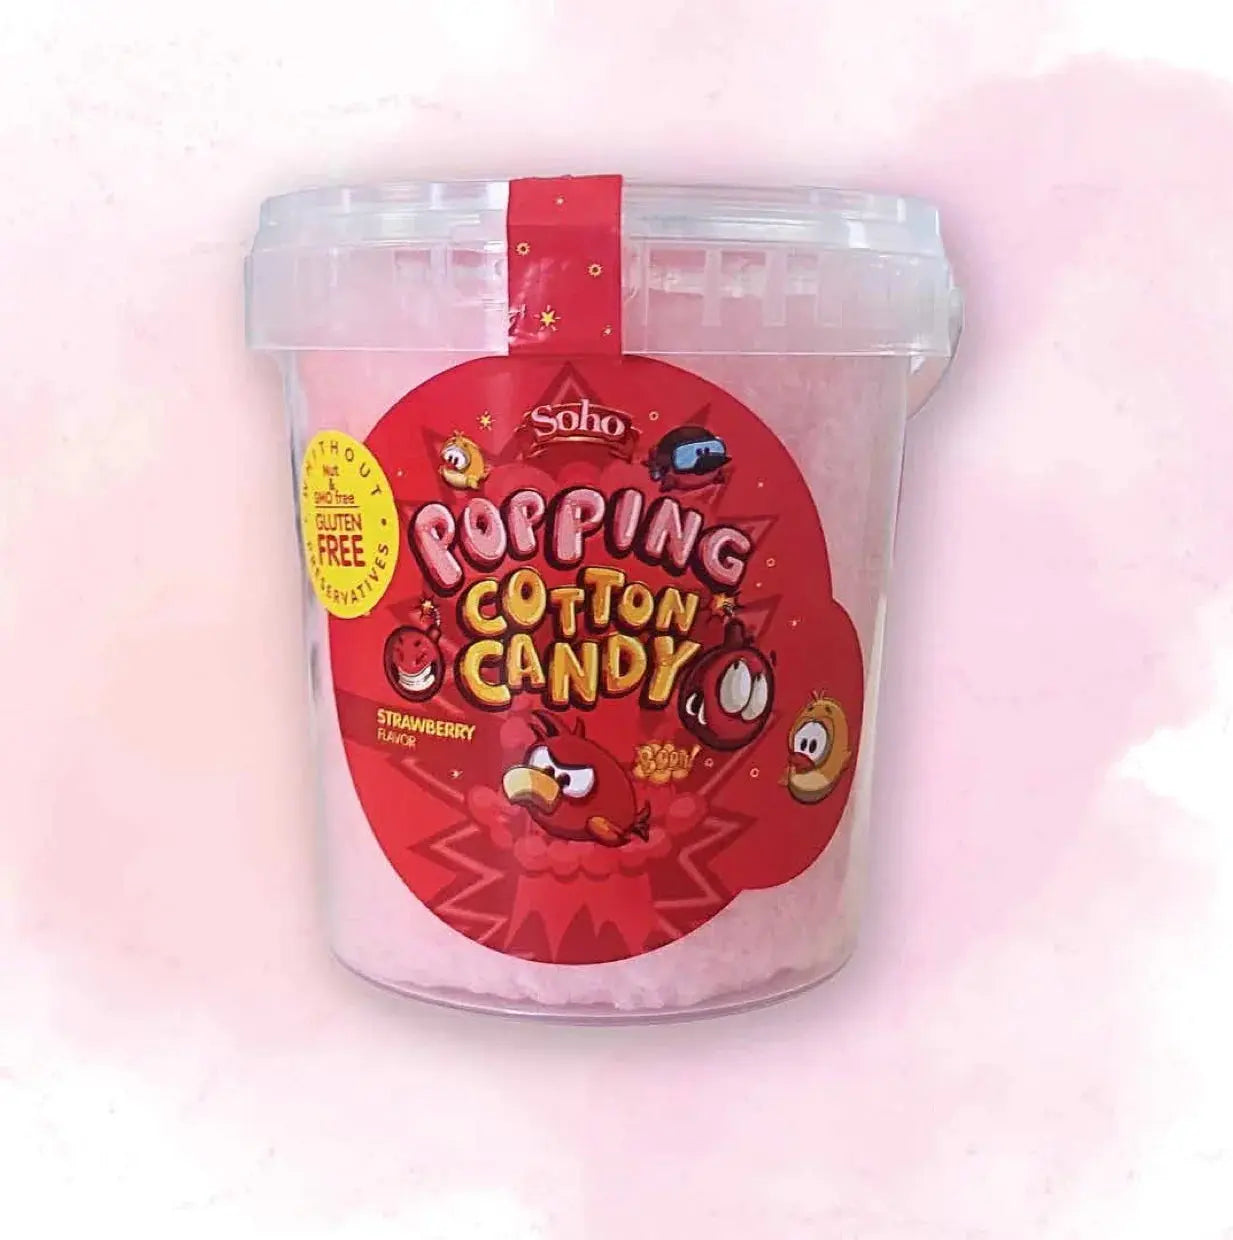 Soho Popping Cotton Candy - Strawberry Flavor - 50g - Greens Essentials